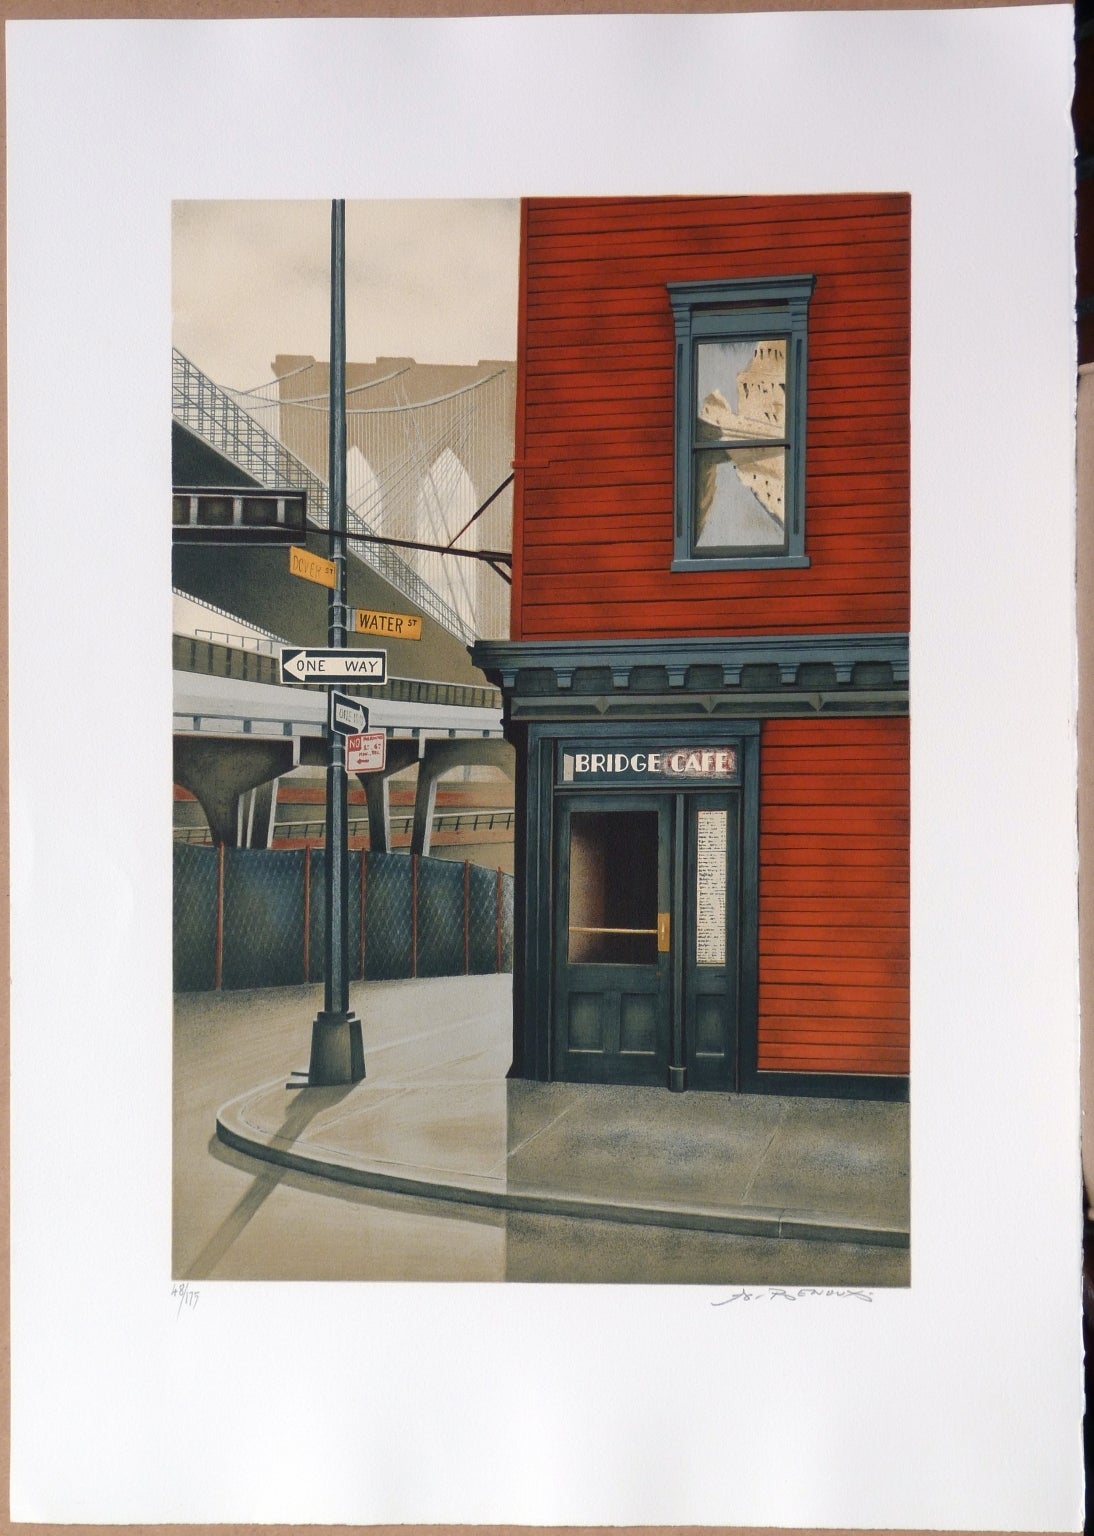 The Bridge Café in New-York USA - Print by André RENOUX